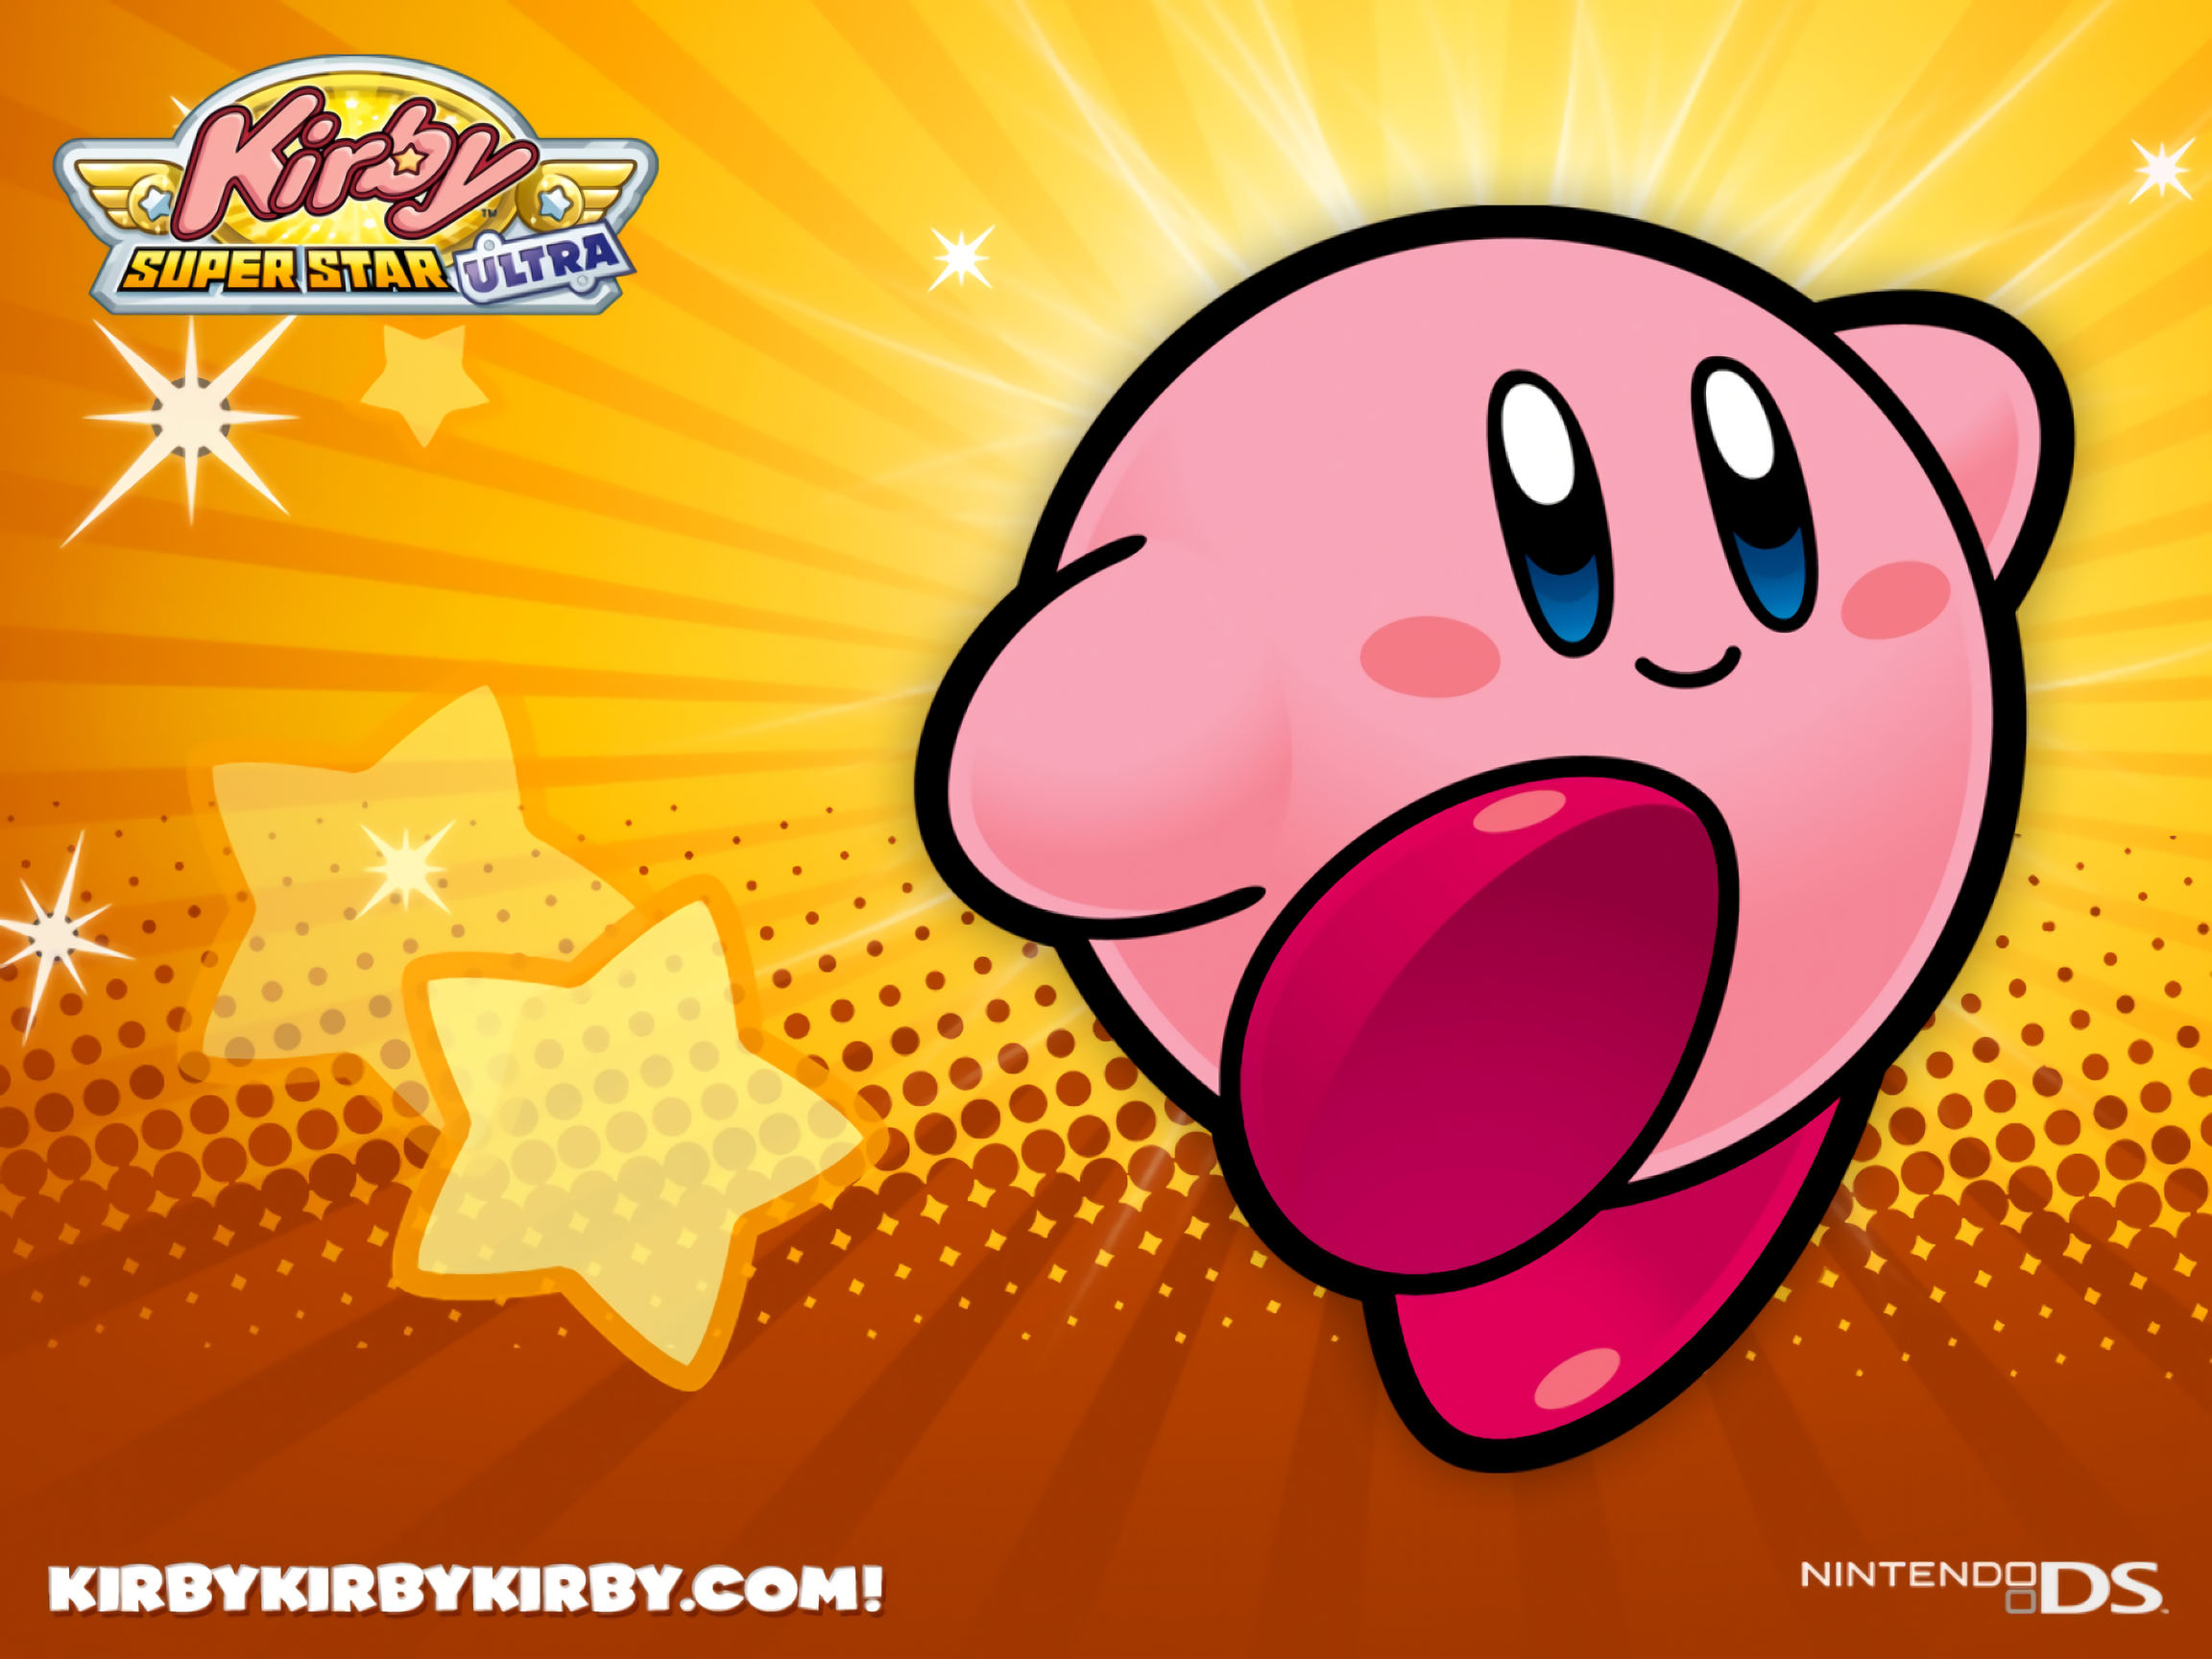 Kirby super star ultra download code for wii u